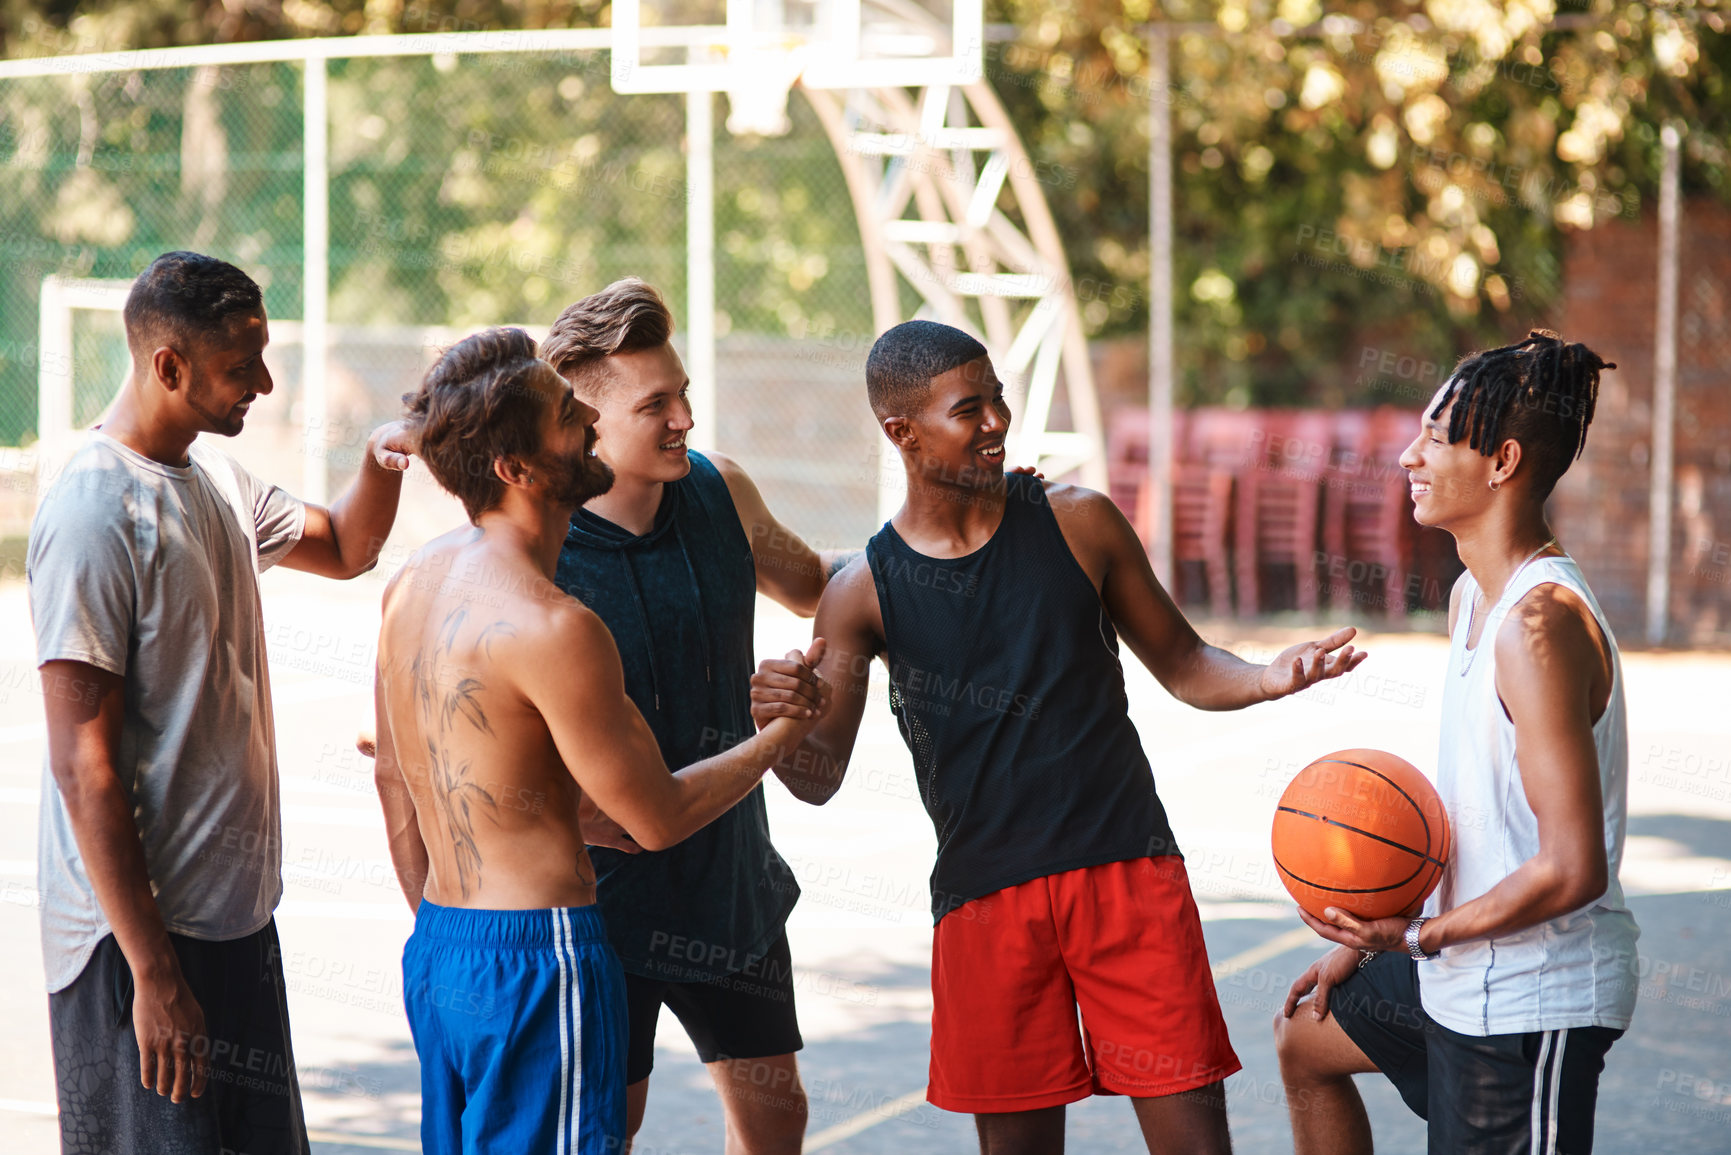 Buy stock photo Shot of a group of sporty young men greeting each other on a basketball court